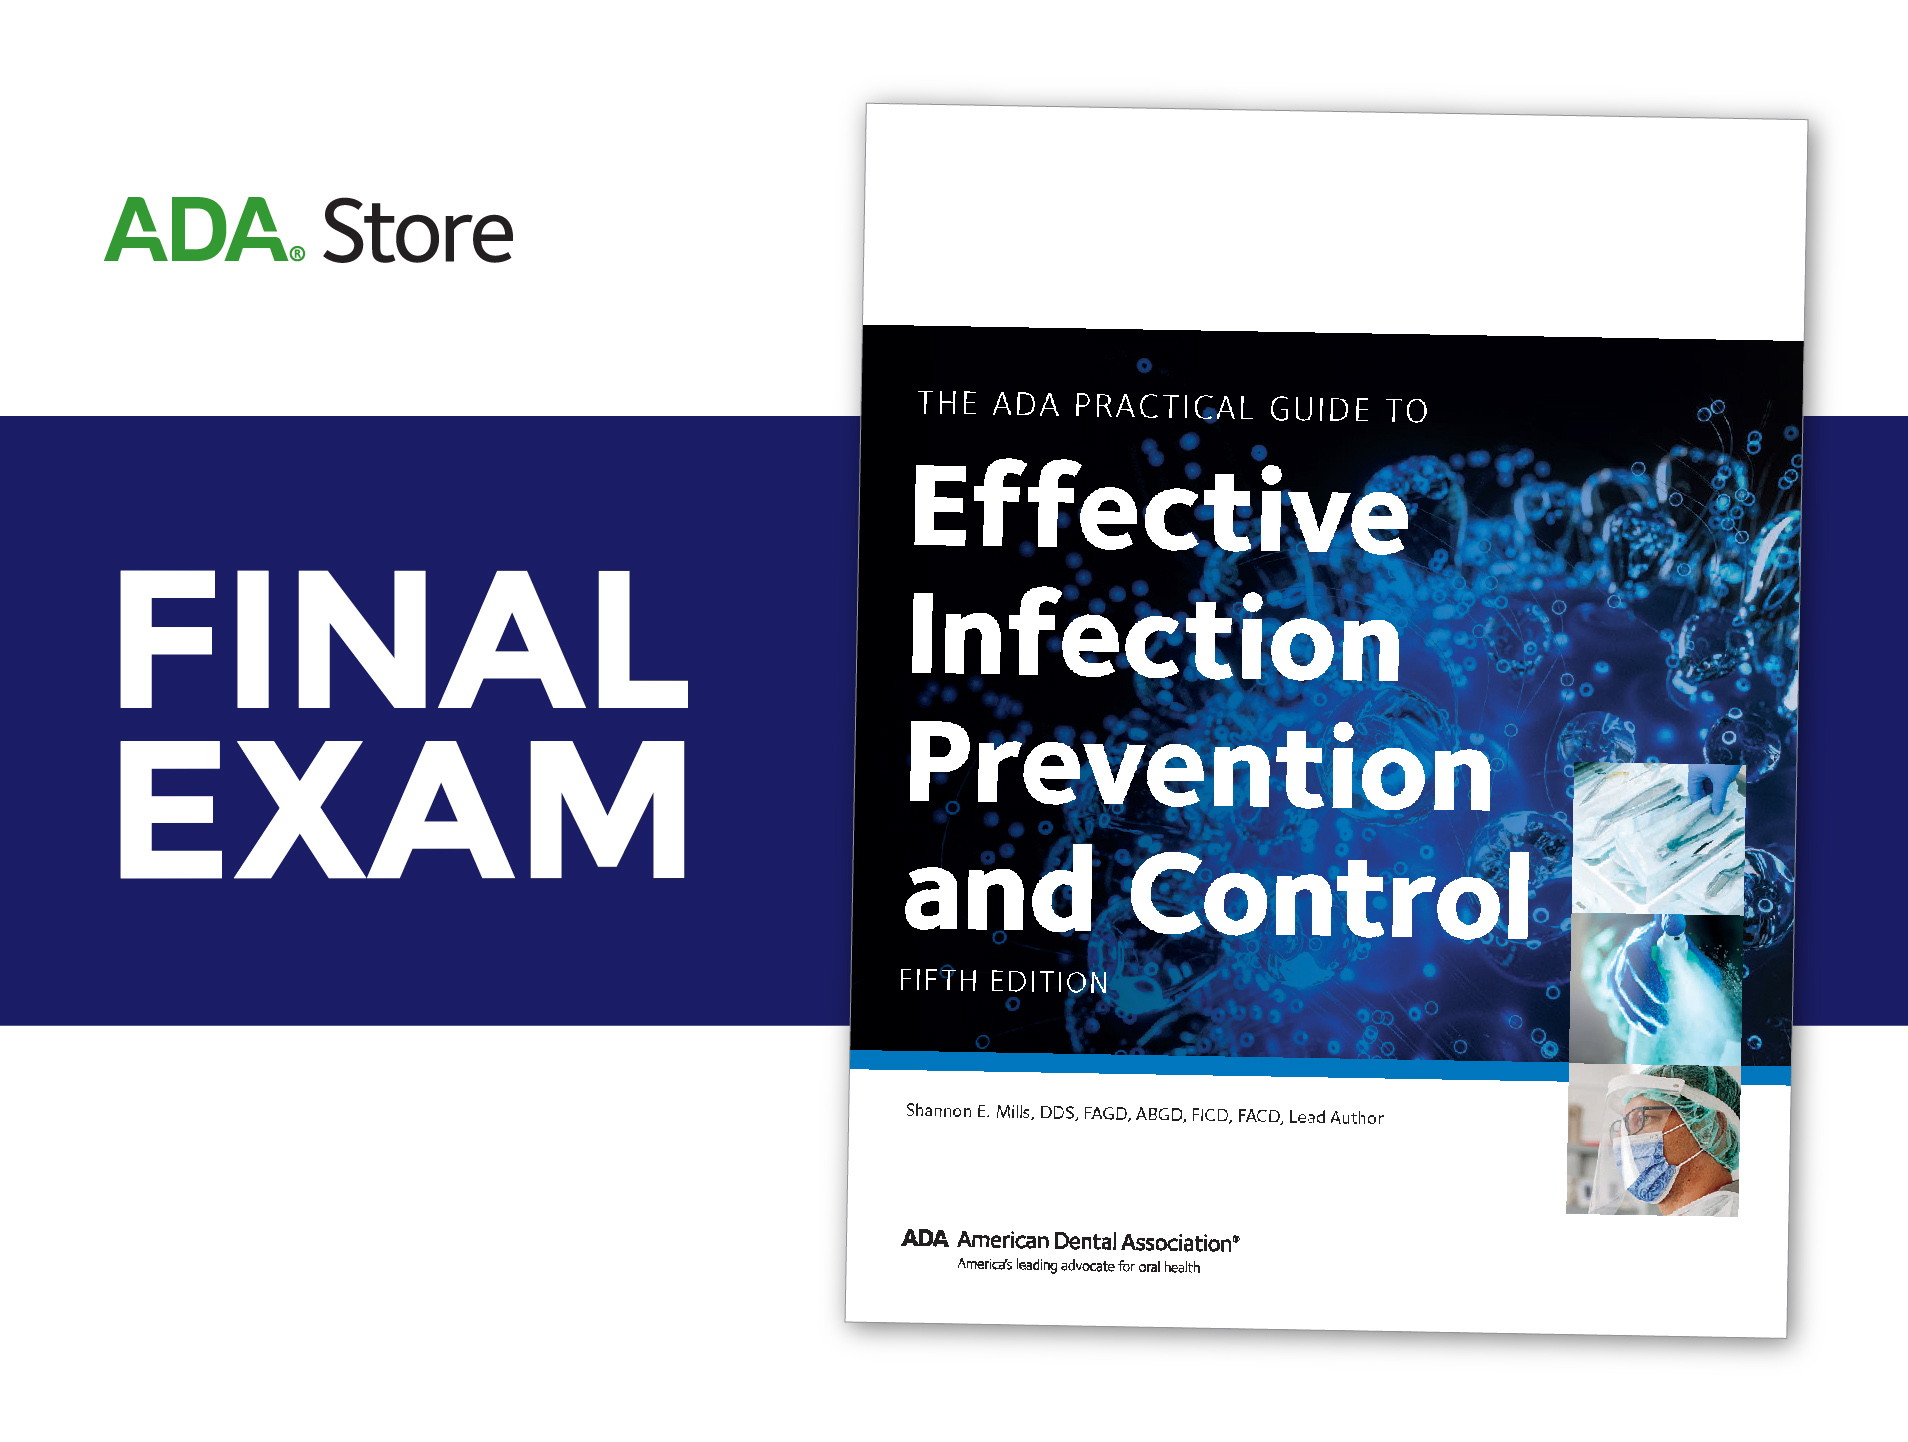 Final Exam - ADA Practical Guide to Effective Infection Prevention And Control (ADA Store)